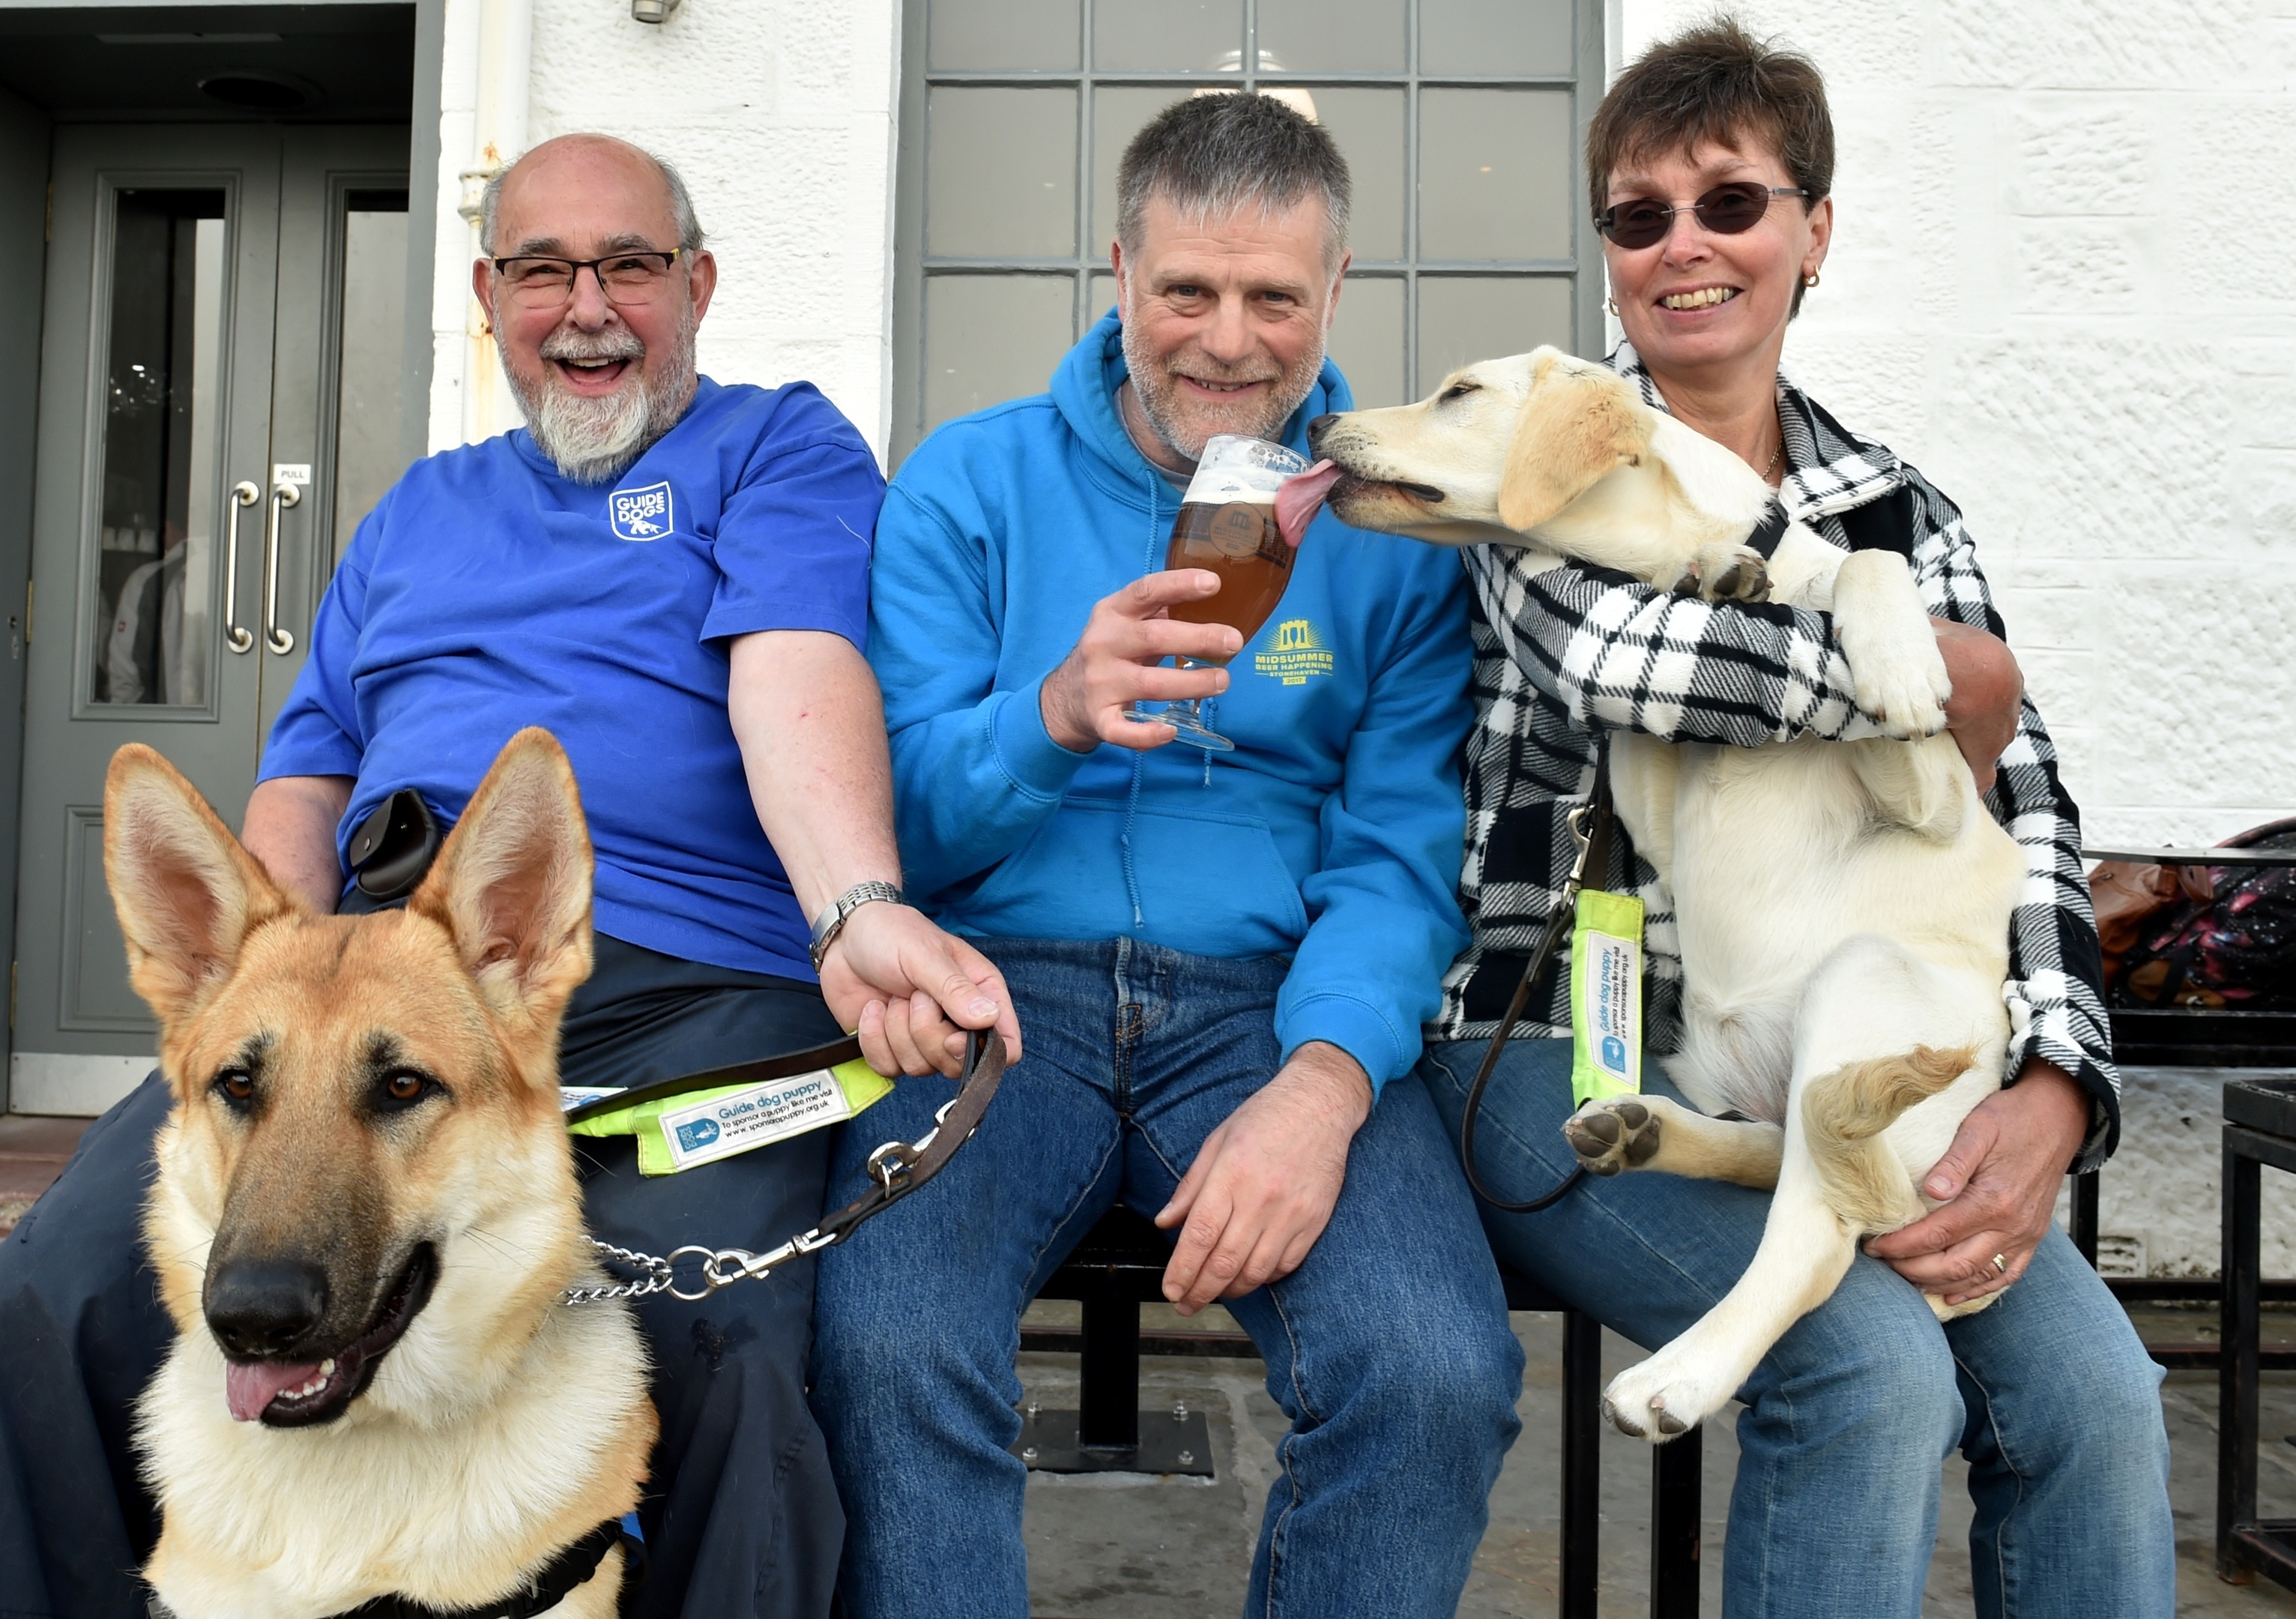 Stonehaven branch of the Guide Dogs charity received a cheque for £10,000 from the Stonehaven Beer Festival.